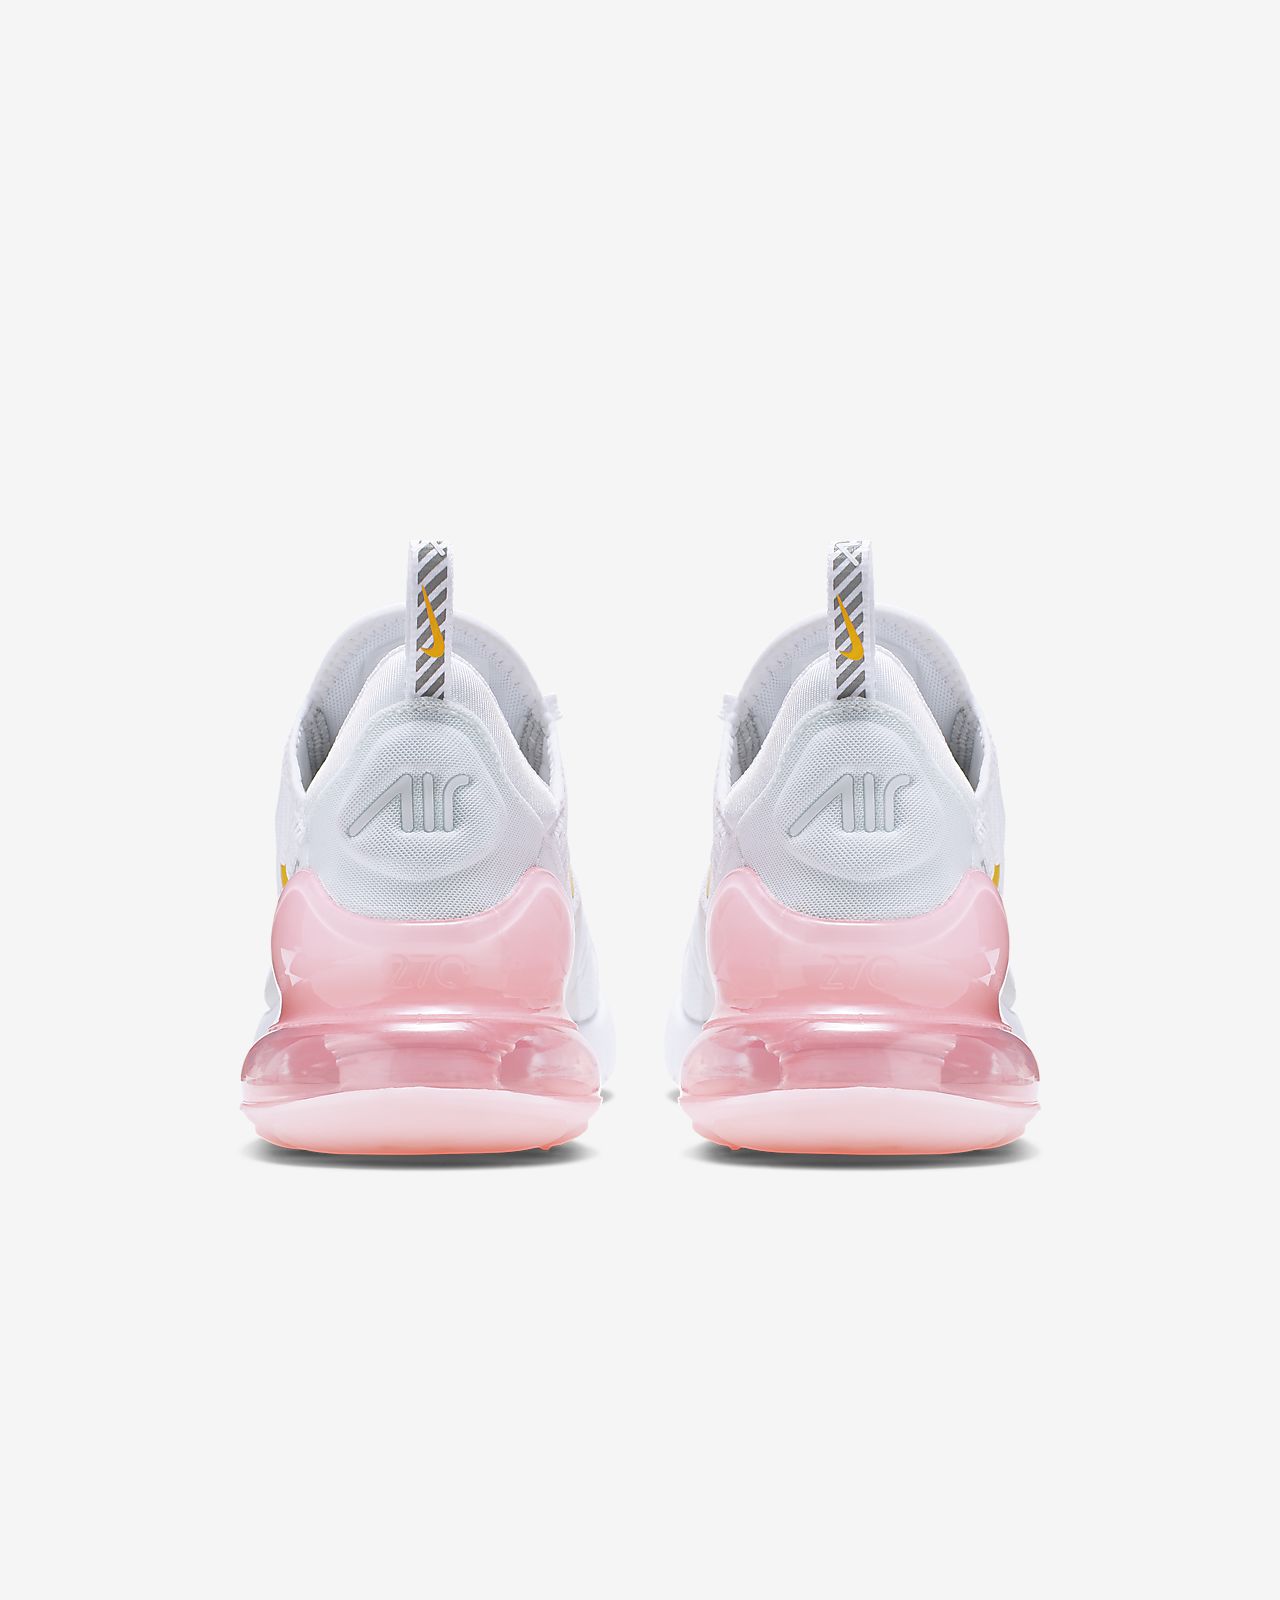 air max 270 light pink and white